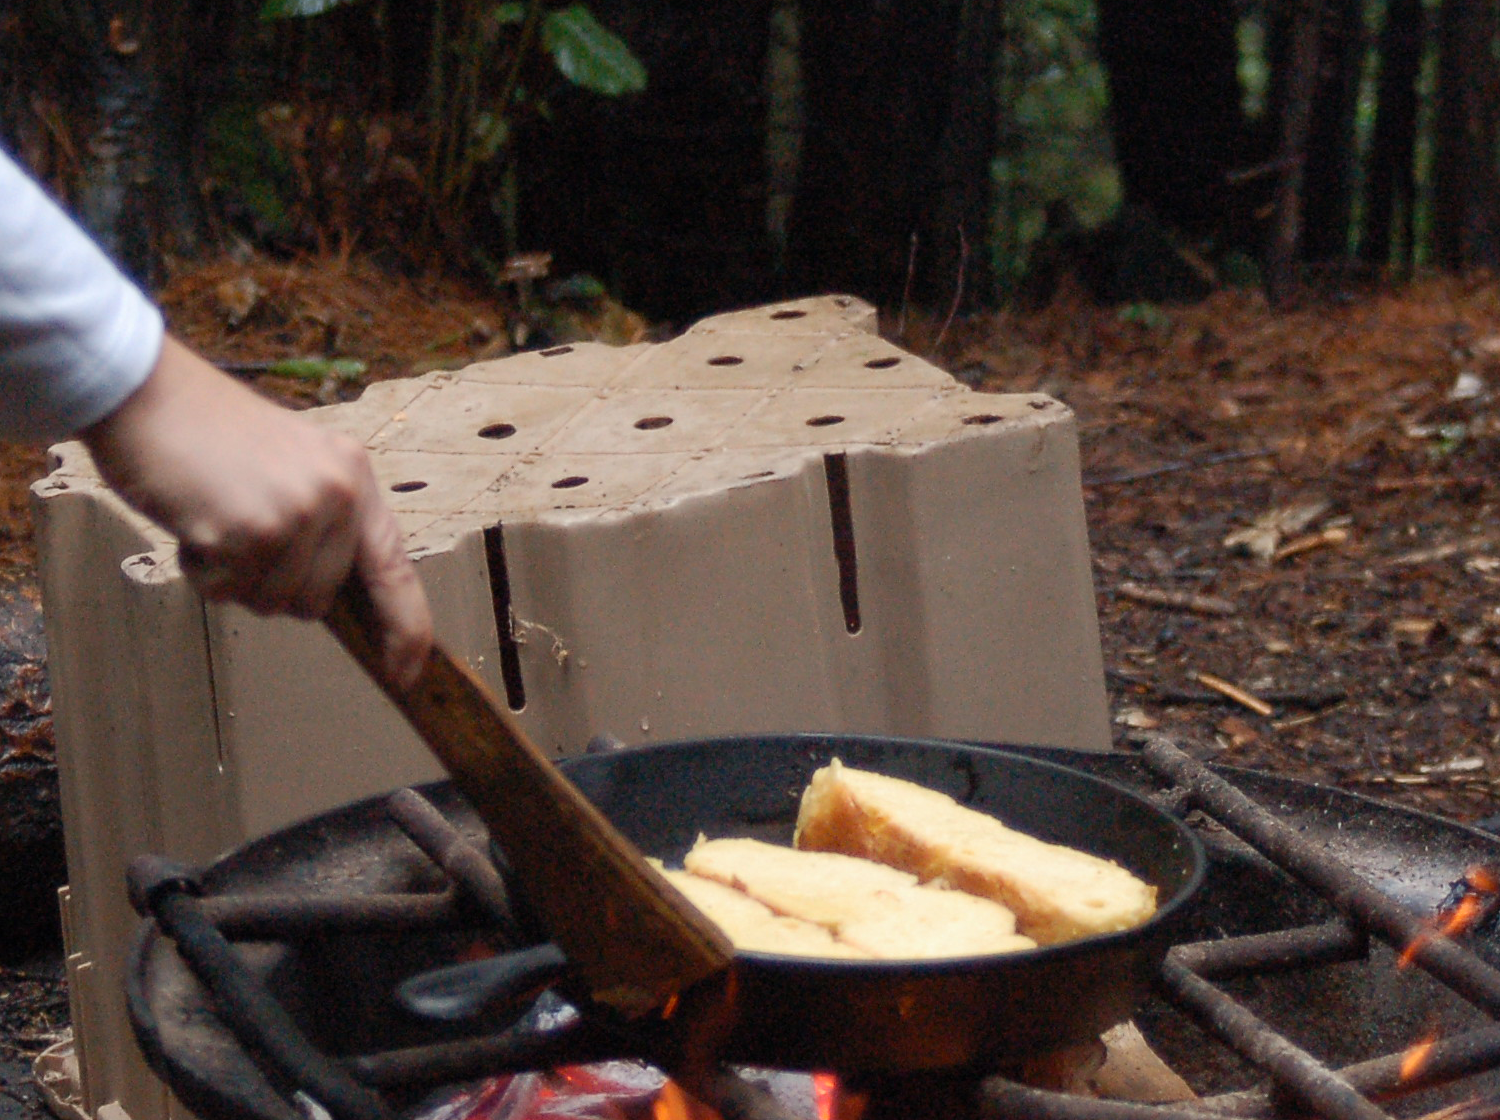 Cast Iron Skillets are Great for Camping